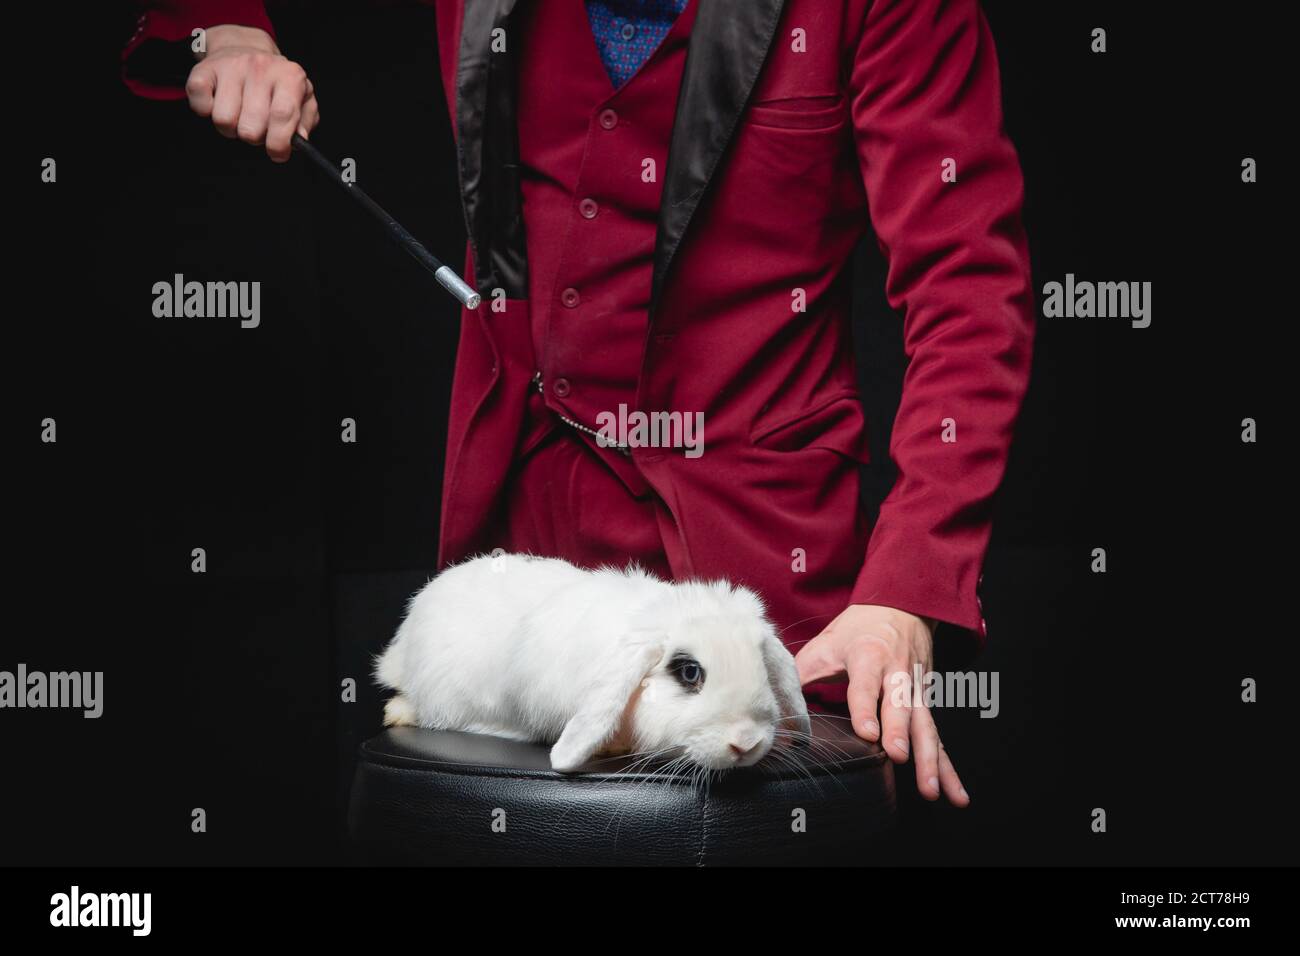 why do magicians use rabbits for magic tricks instead of puppies or hamsters